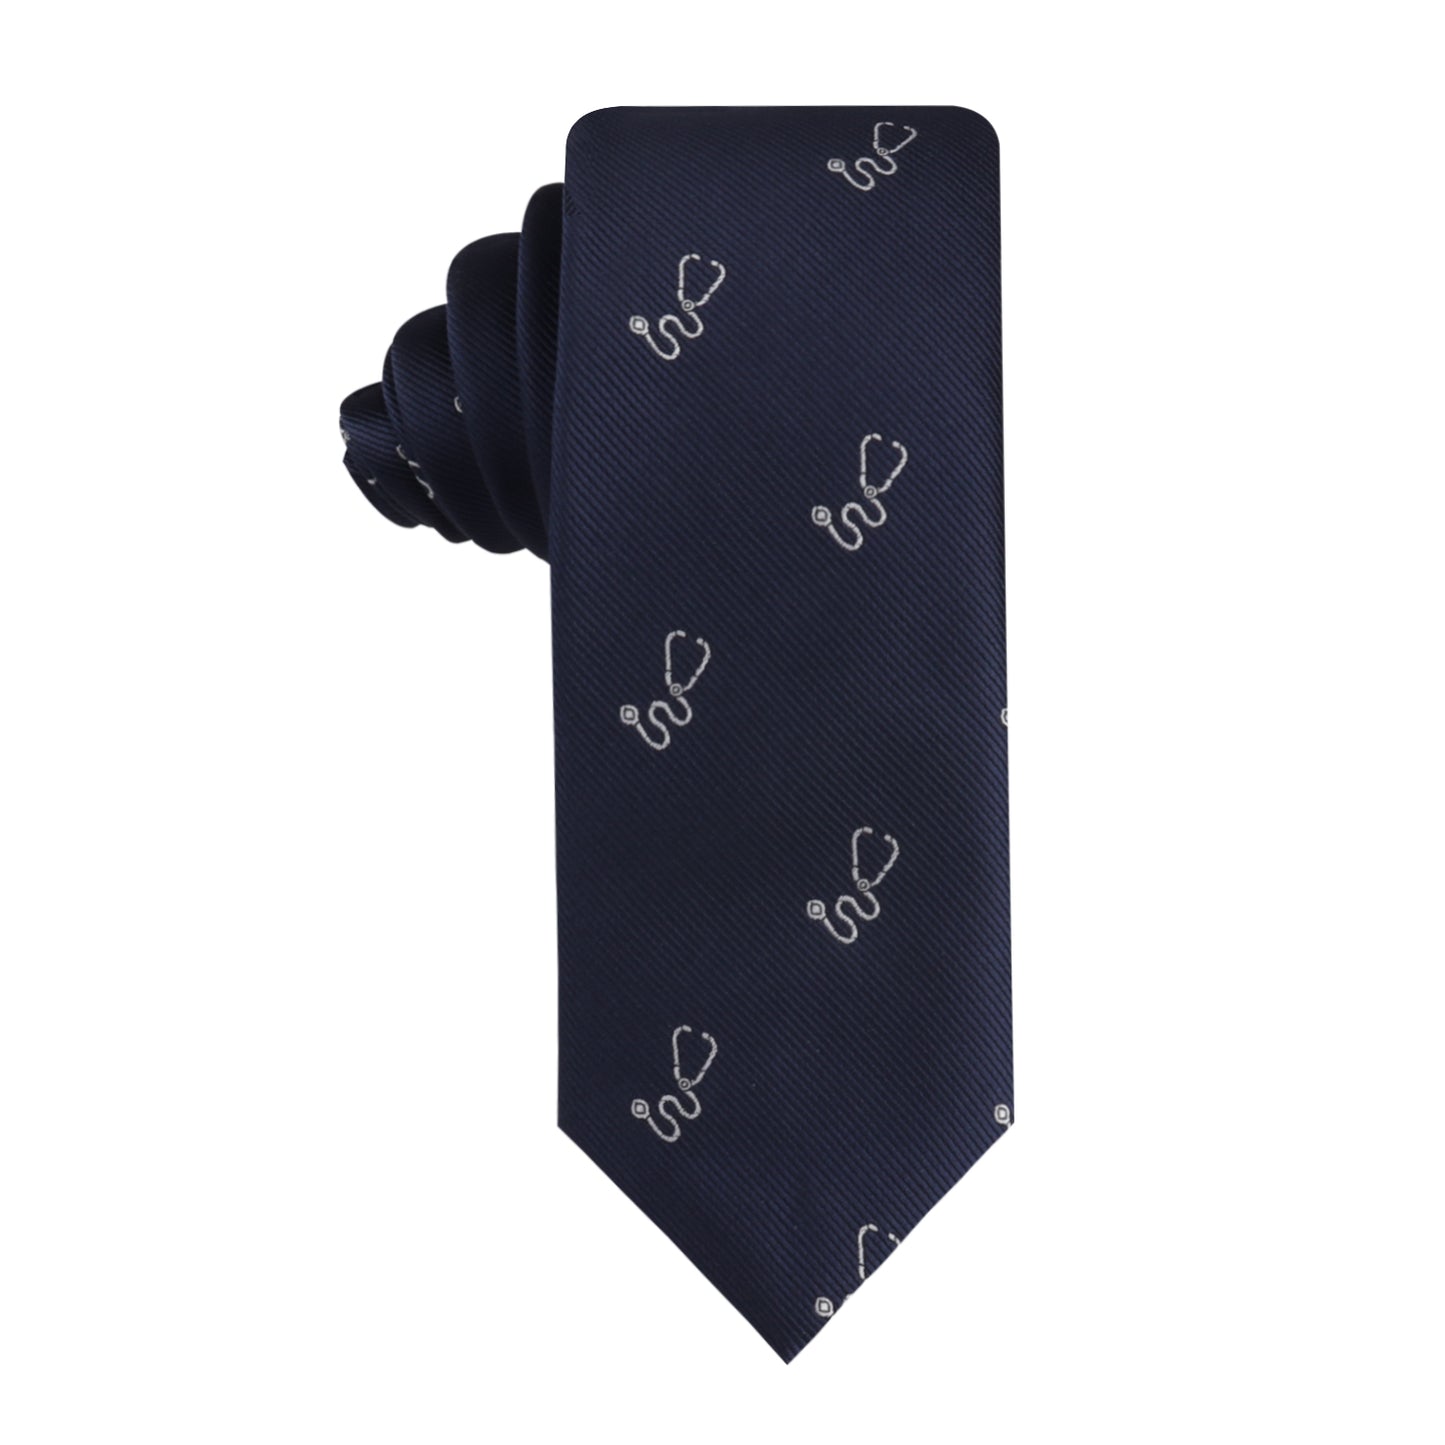 An extraordinary navy Stethoscope Skinny Tie, perfect for those who heal.